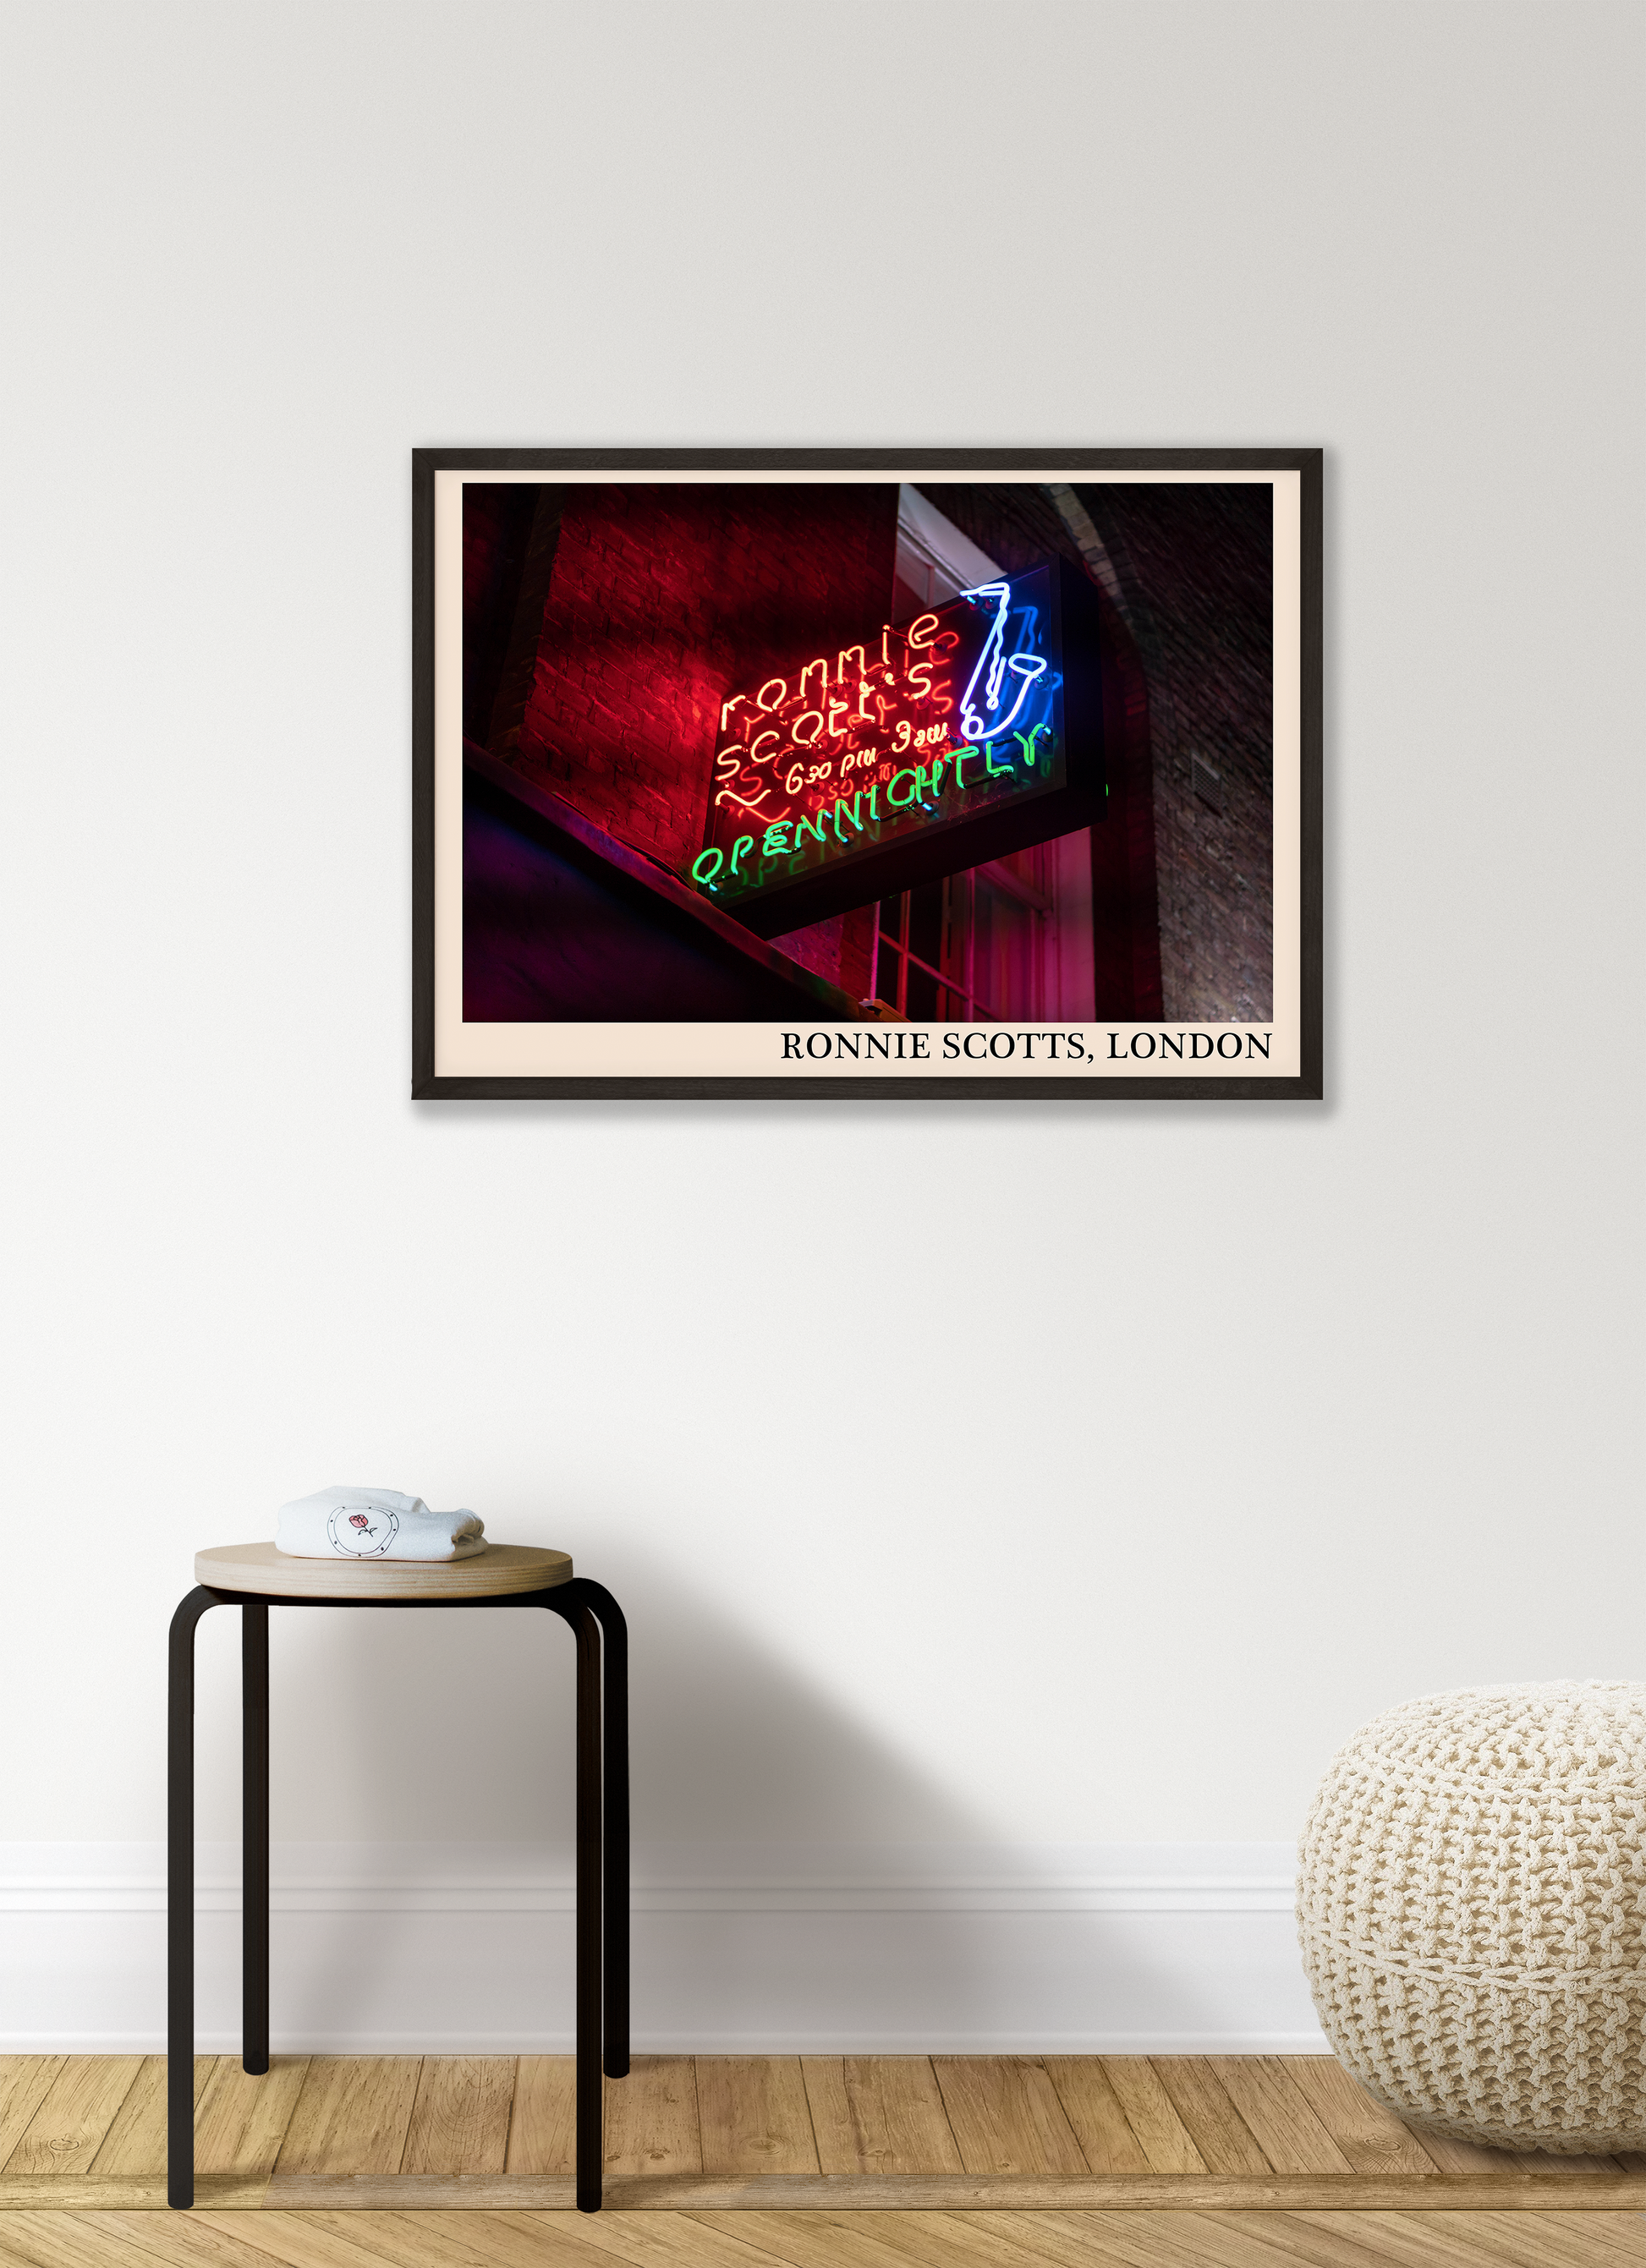 Iconic photo of Ronnie Scotts jazz club in London. Picture crafted into a retro black framed jazz print, with an off-white border. Poster is hanging on a grey living wall